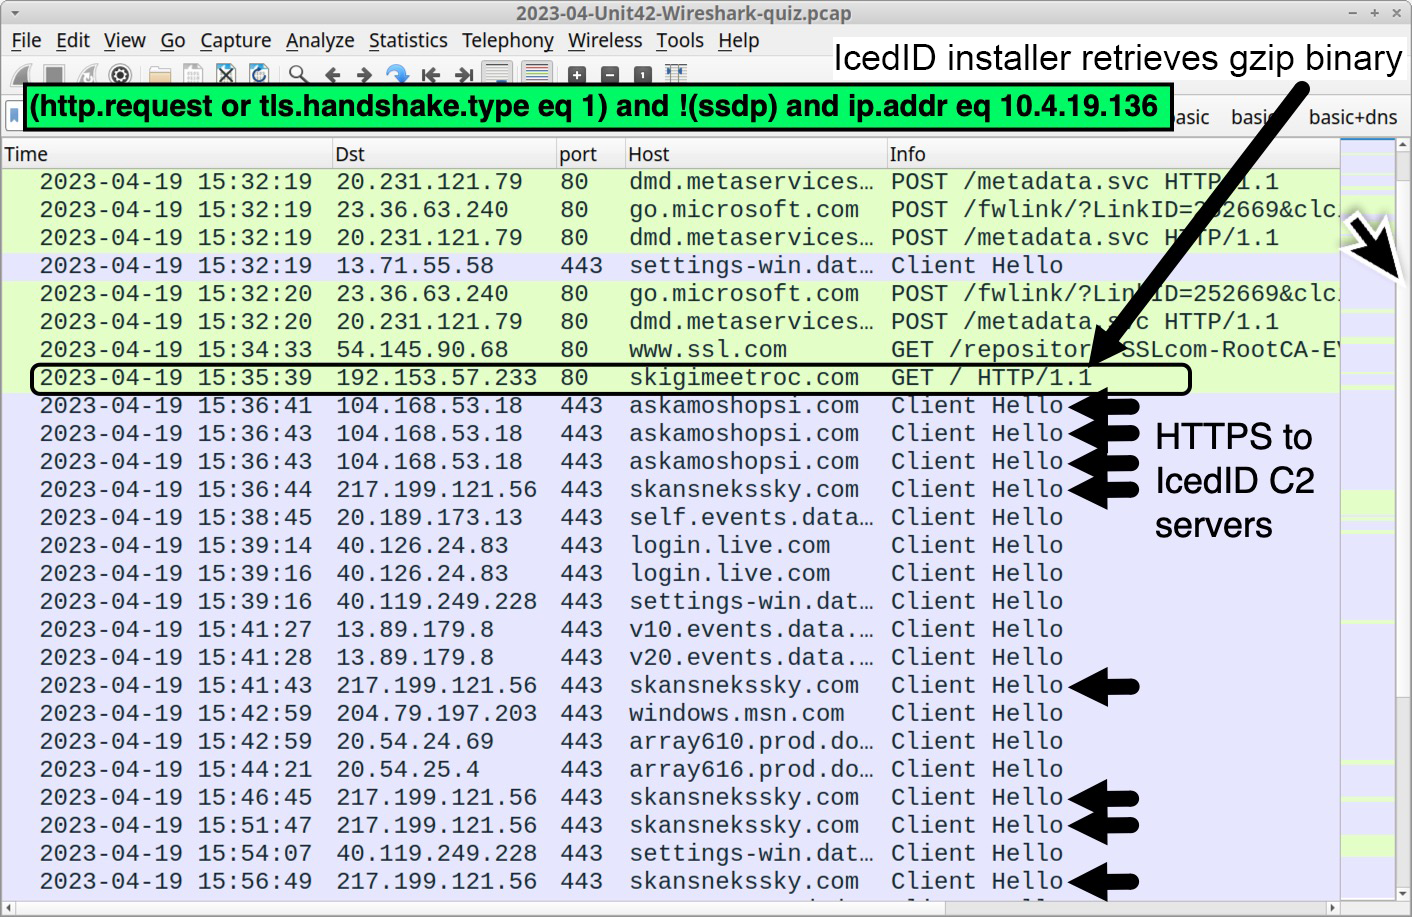 Image 11 is a screenshot of the Wireshark traffic for the command and control IcedID servers. Highlighted with a black box is the IcedID installer that retrieve the gzip binary.